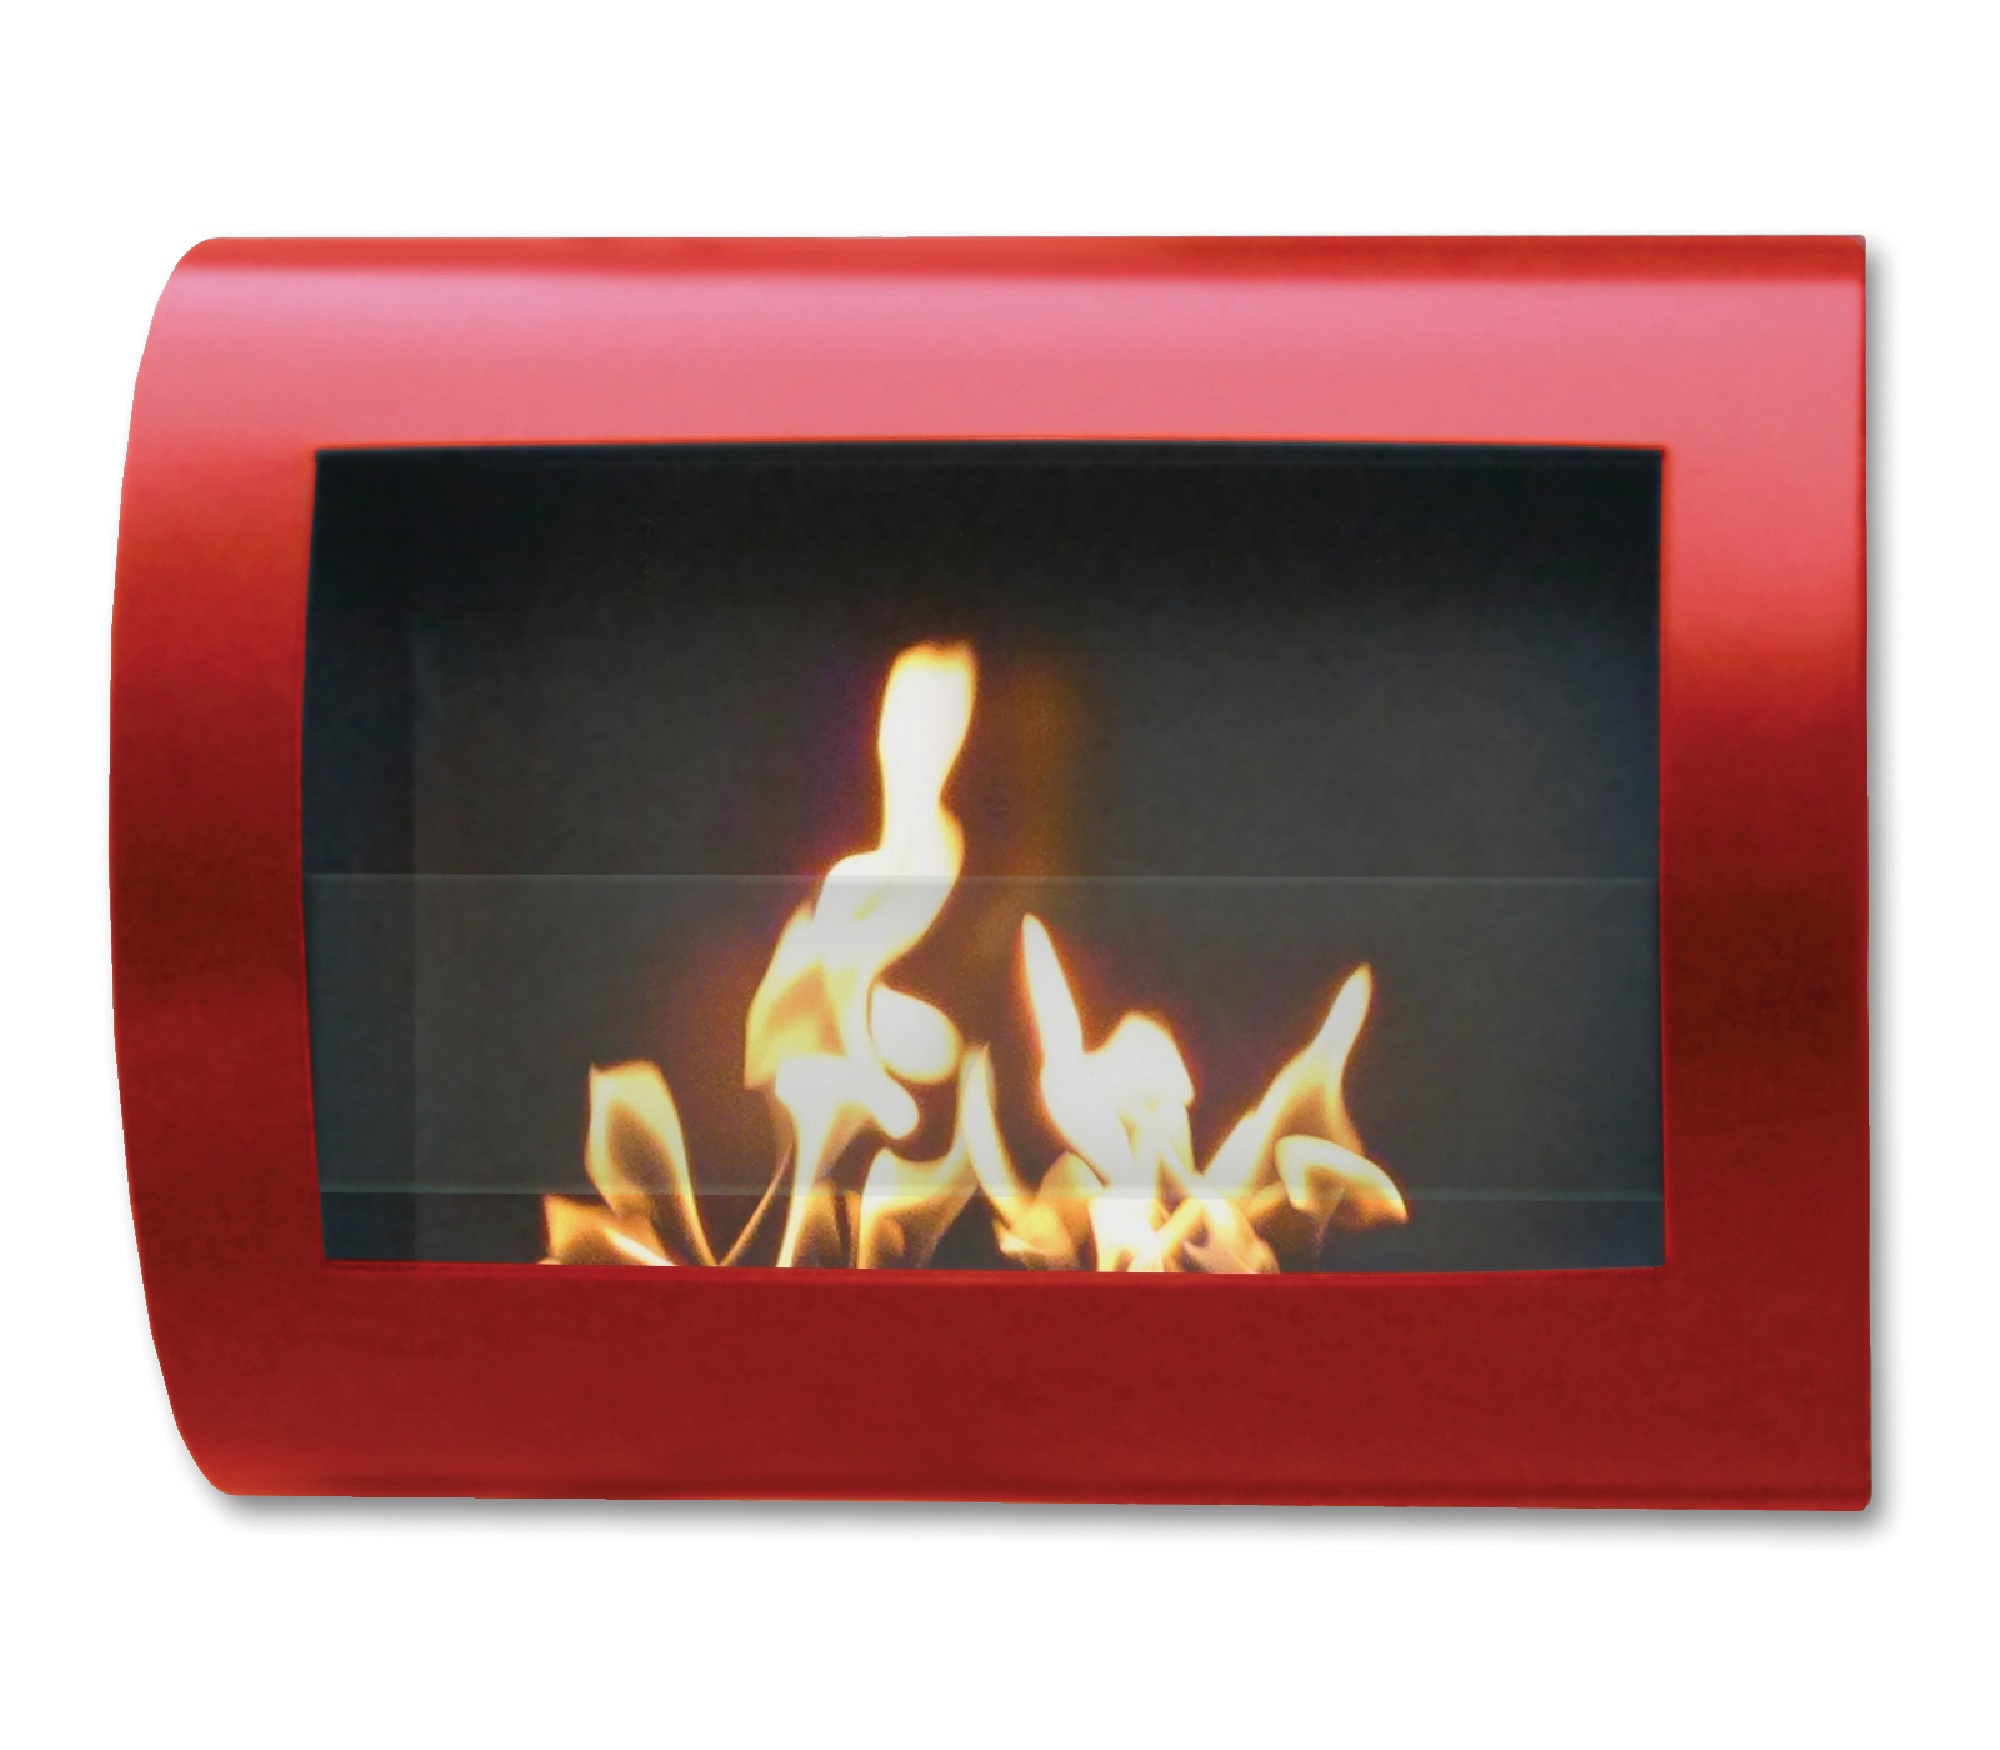 Luxury Fireplace Group Anywhere Fireplace Indoor Wall Mount Fireplace - Chelsea (Red) Model